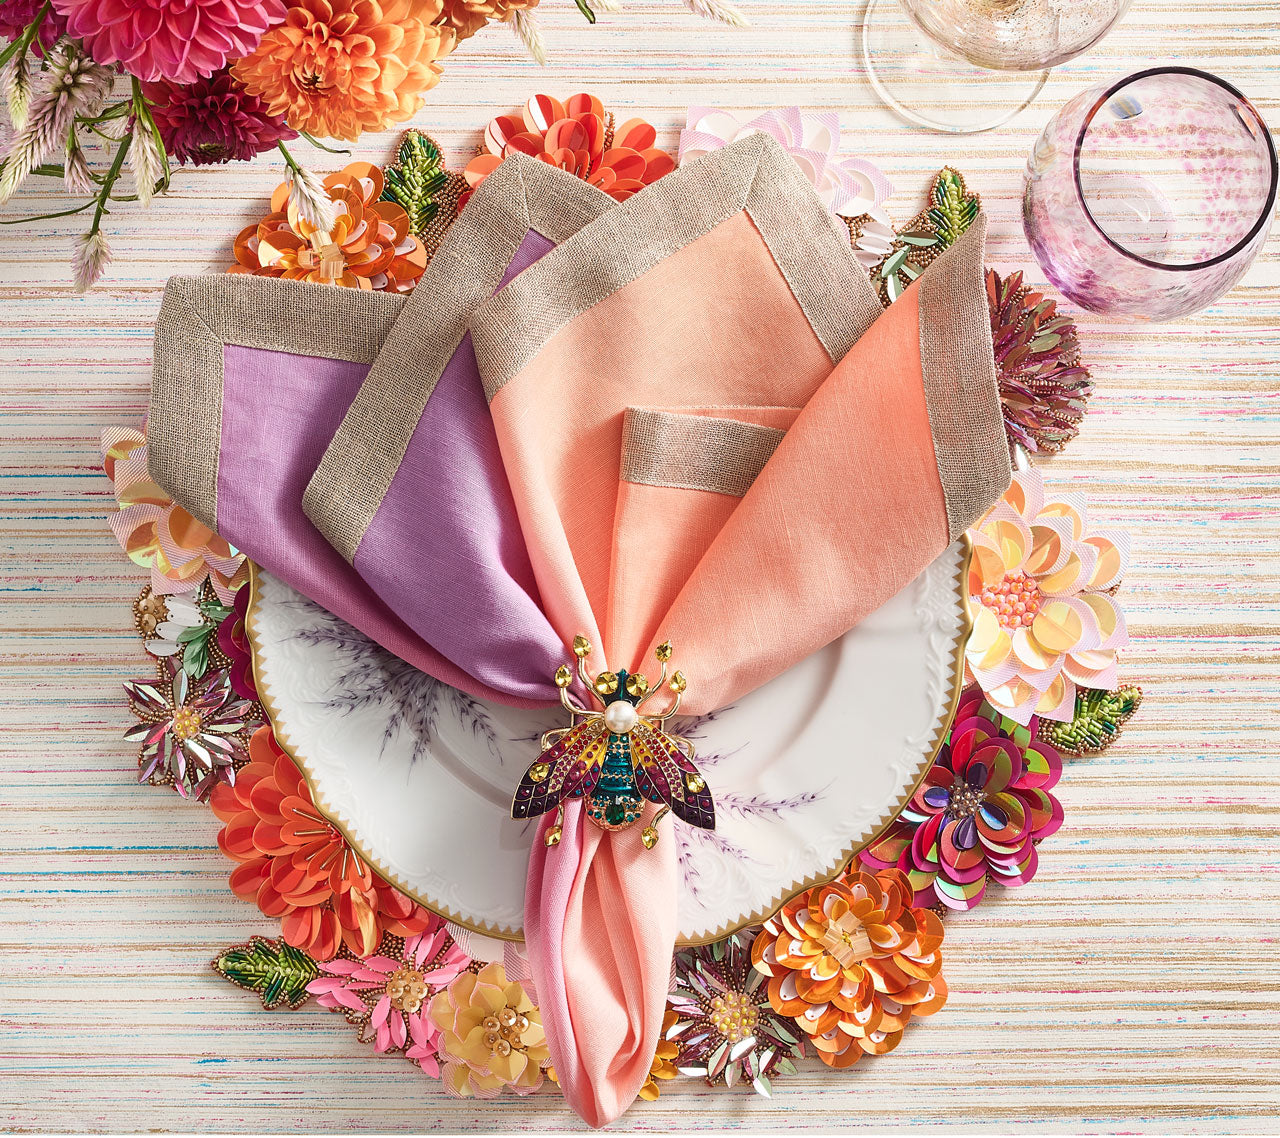 Kim Seybert Luxury Dip Dye Napkin in sorbet on a table setting with a jeweled napkin ring